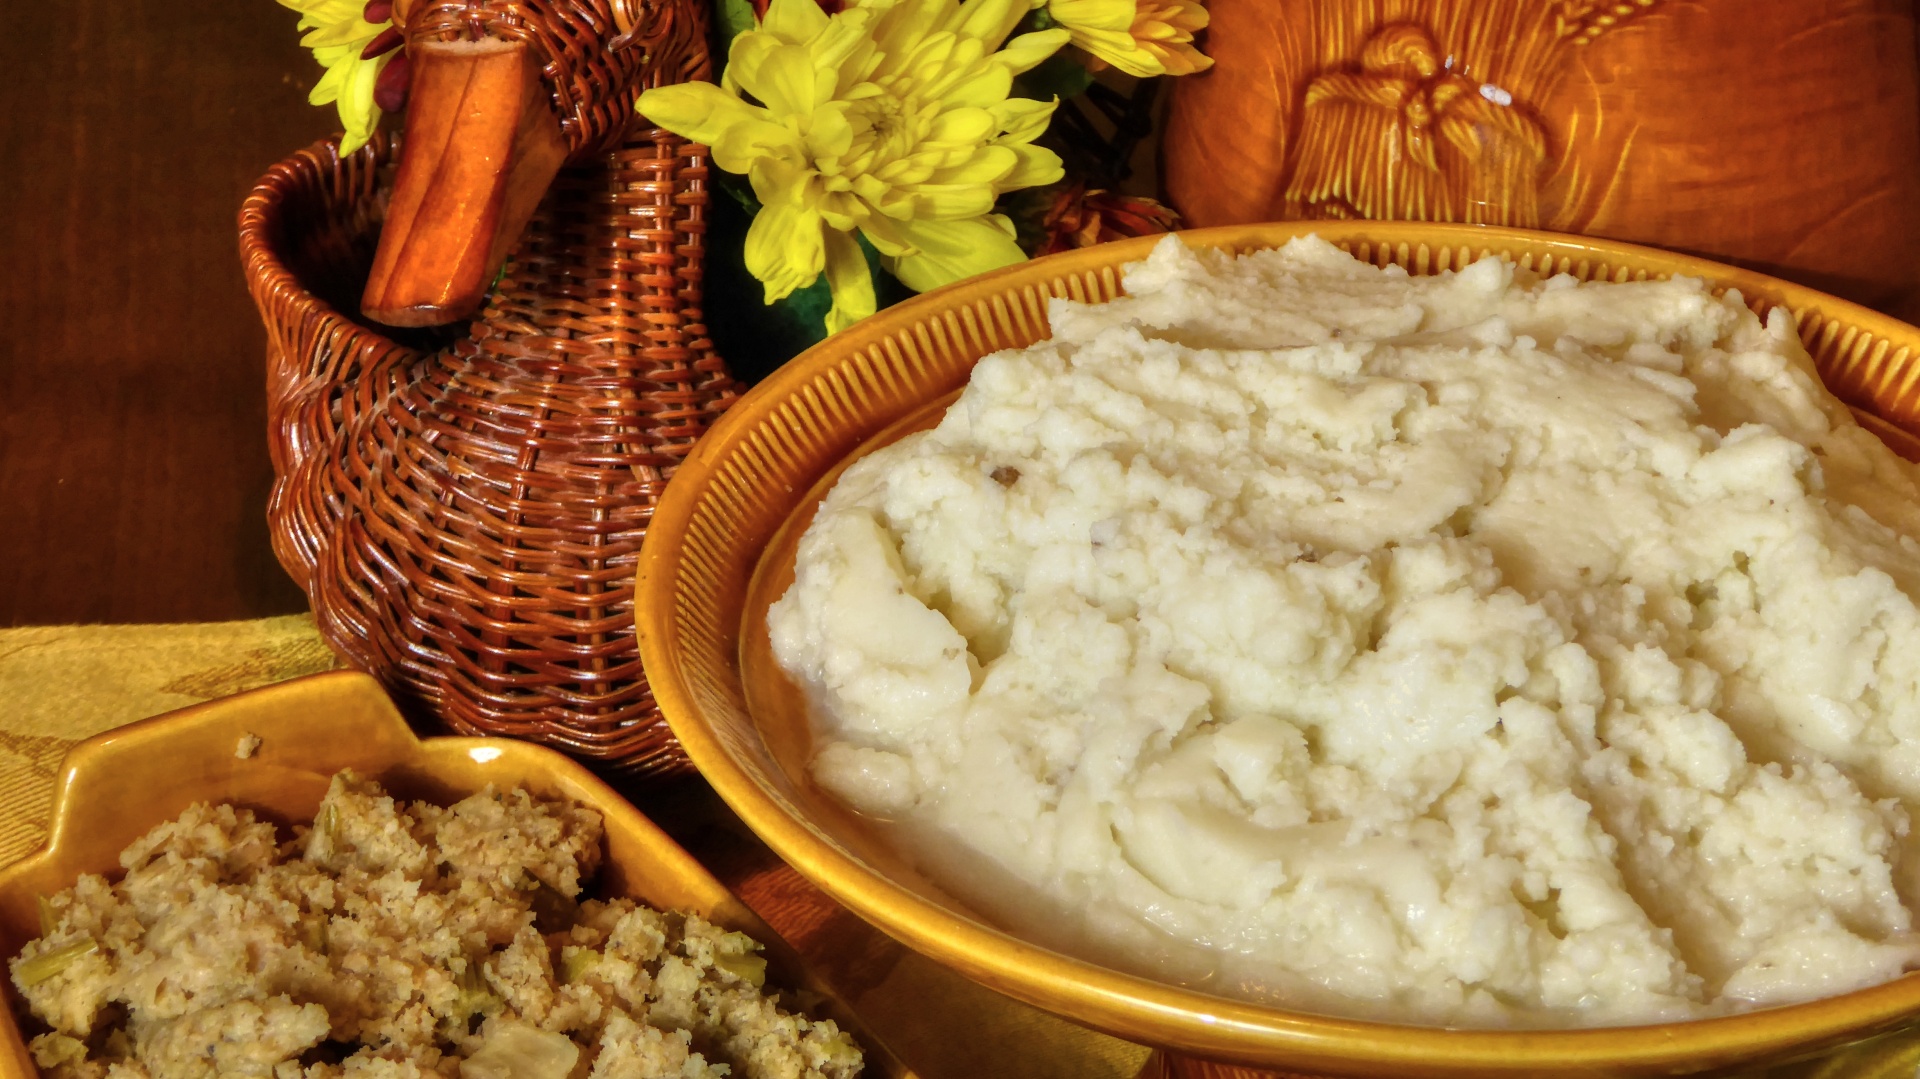 Stephen's Mashed Potatoes With Chive Cream Cheese